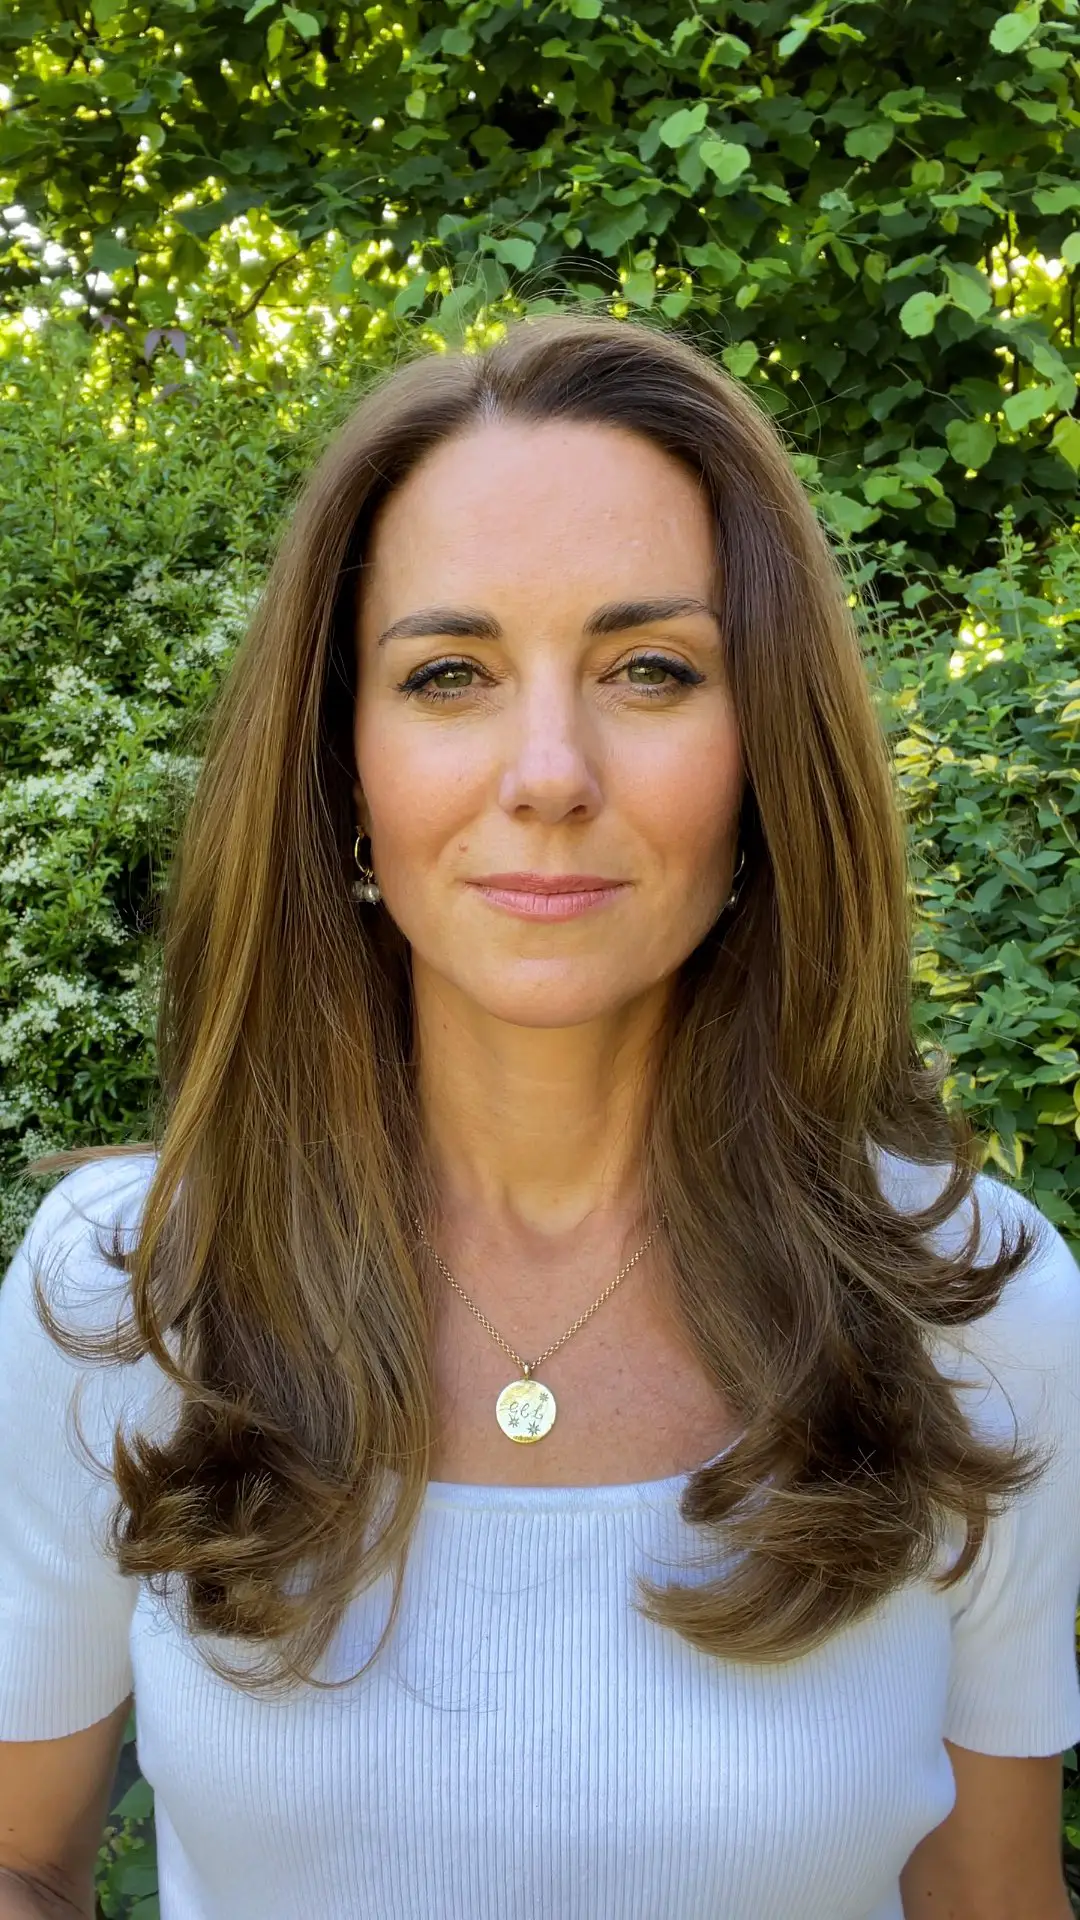 The Duchess of Cambridge is setting up a research centre for early childhood